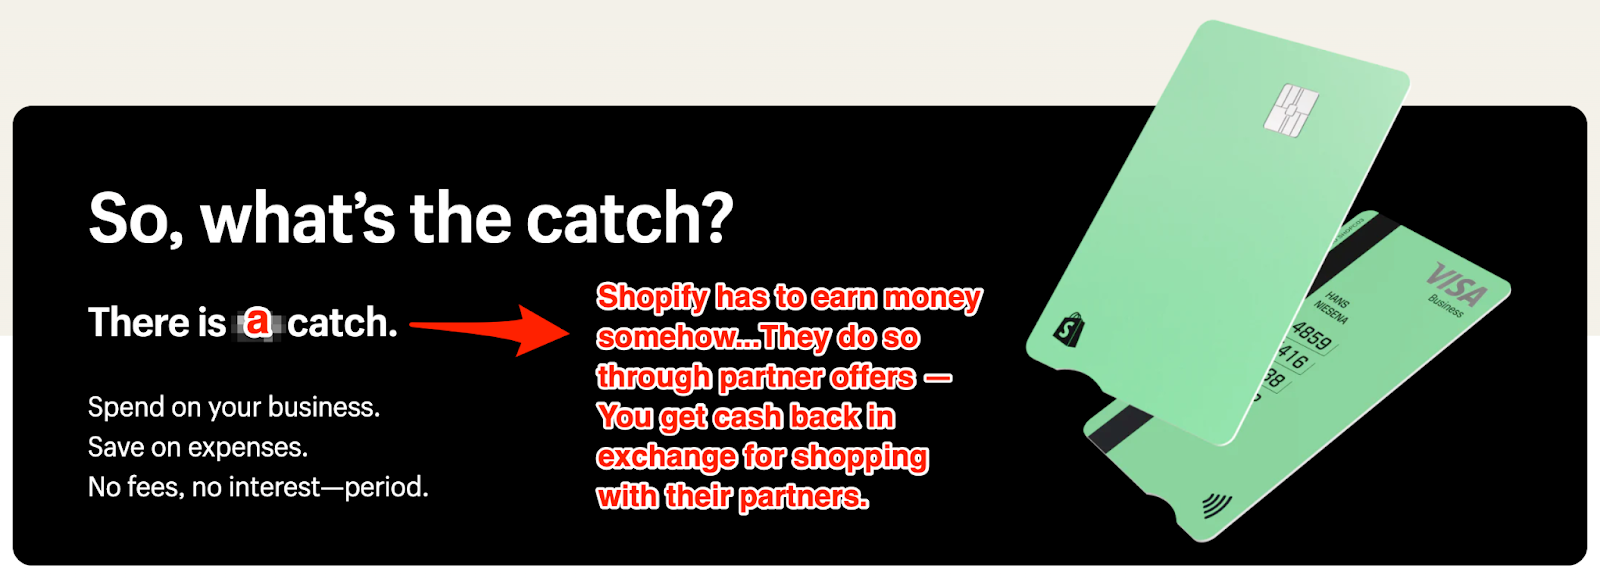 How Does Shopify Credit earn money? 